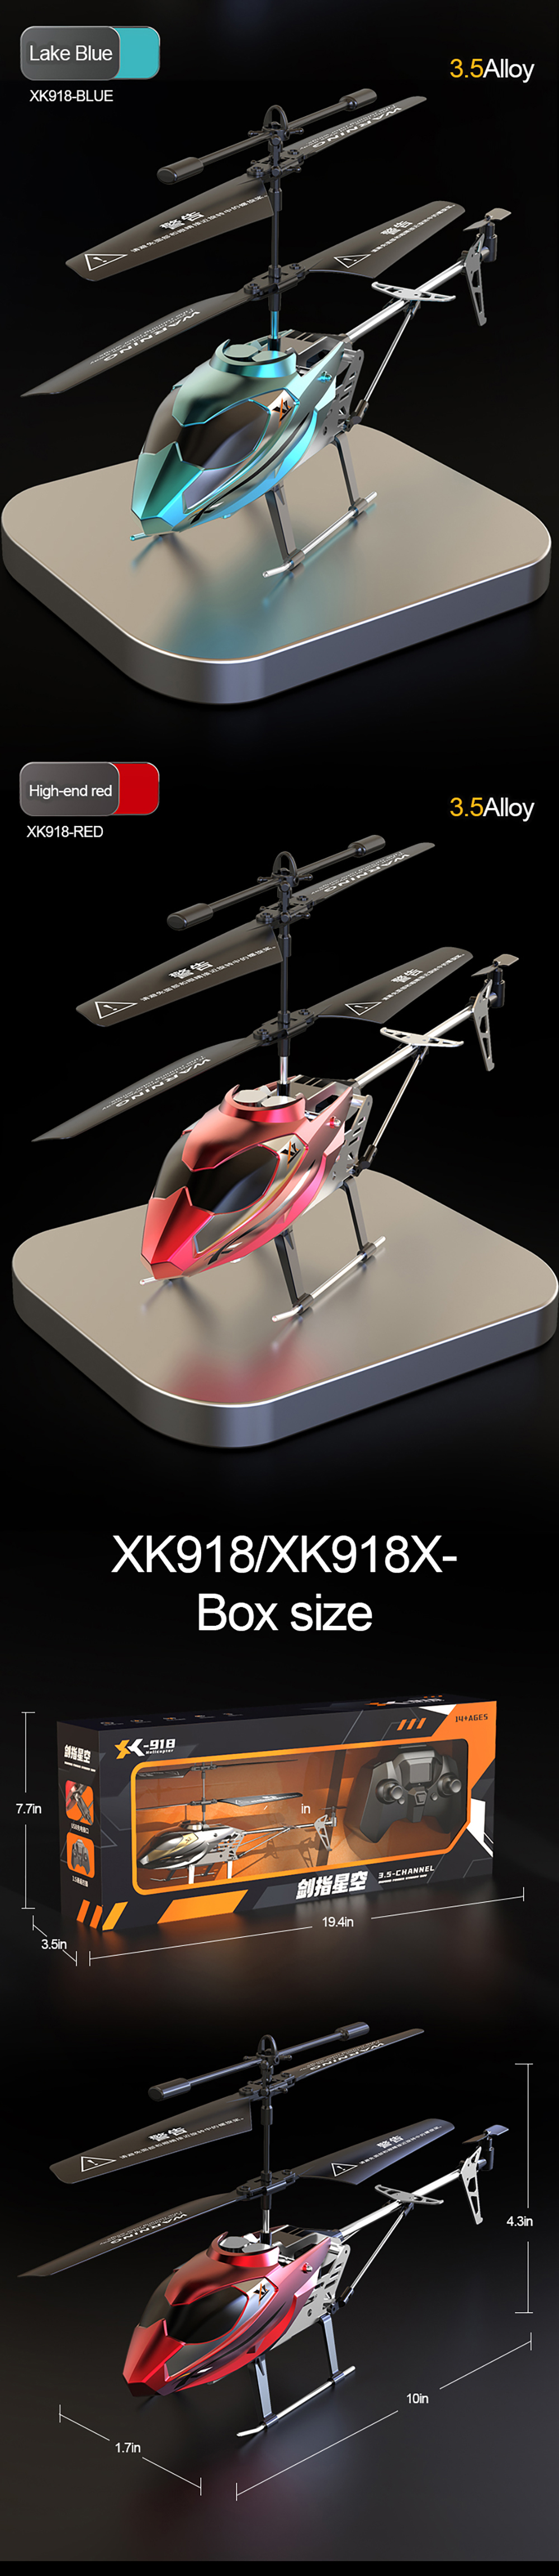 XK918X 2.4G 3.5CH Electric Remote Control Aircraft Drop-resistant Cool Light Aircraft Children's Toys Birthday Gift Cool Lighting Remote Control Toys